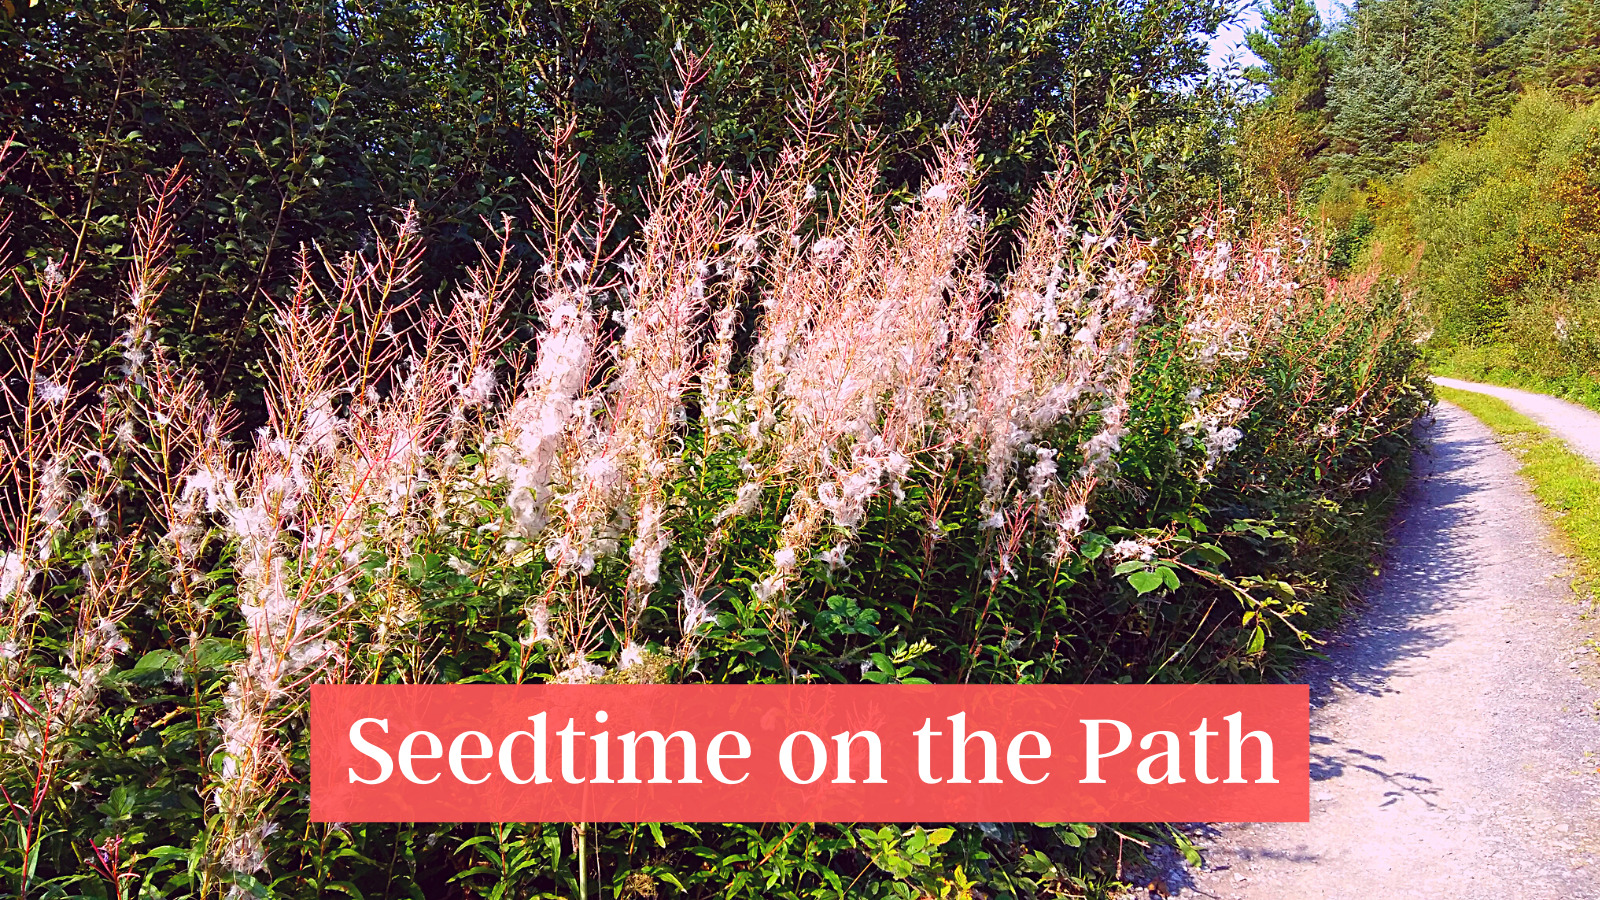 Seedtime on the Path - Pause and Ponder along the Lough Derg Pilgrim Path